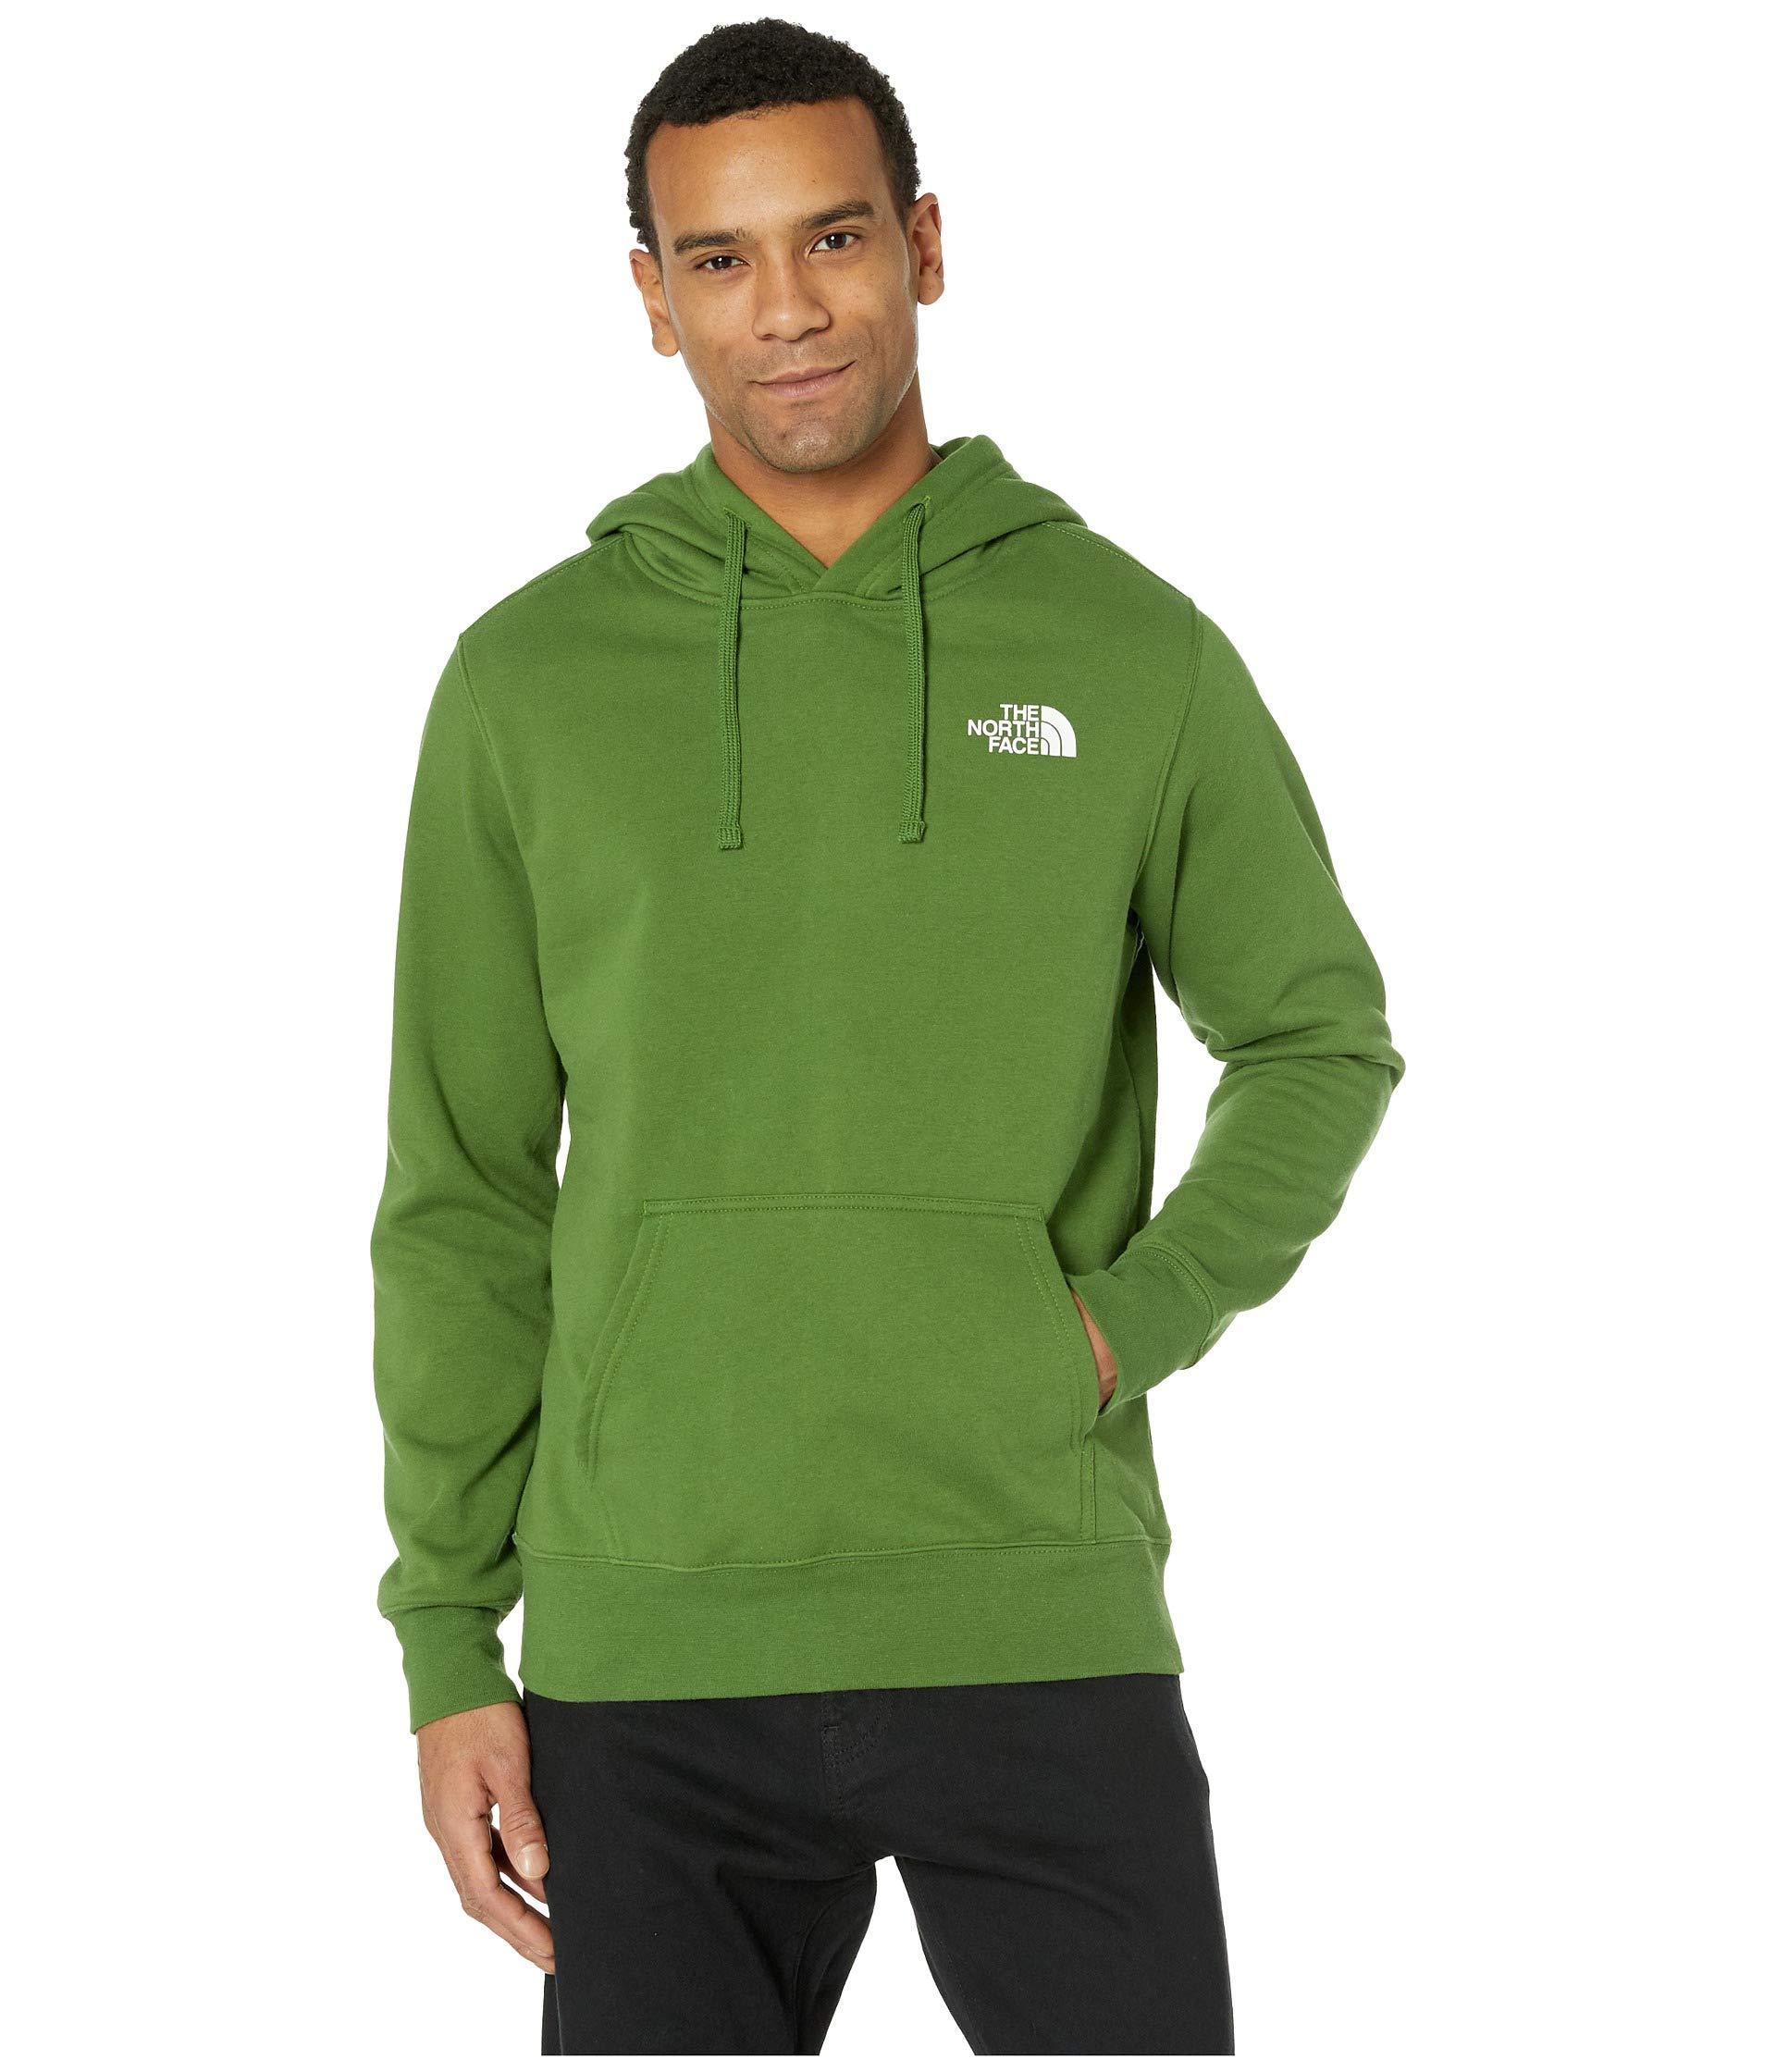 The North Face Cotton Red Box Pullover Hoodie in Green for Men - Lyst